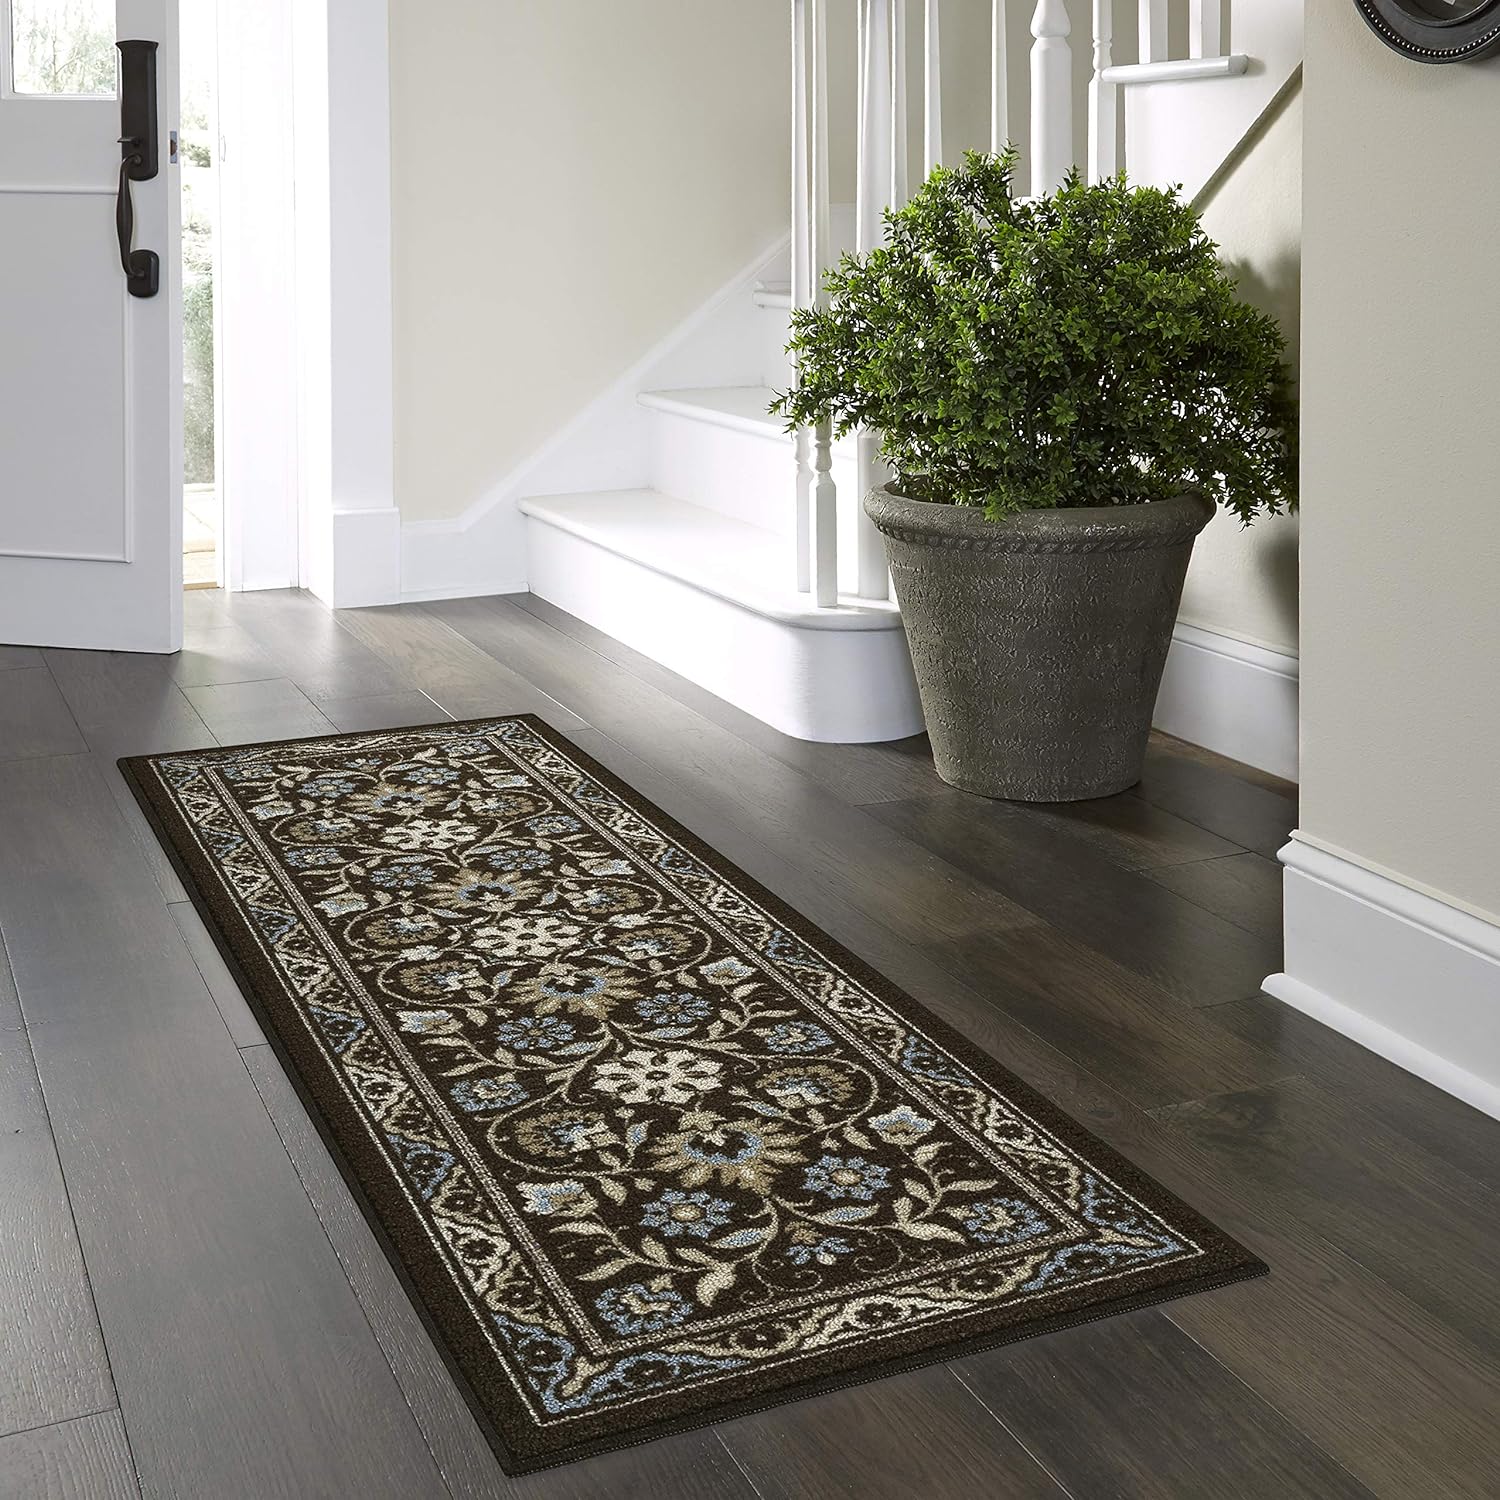 Maples Rugs Florence Runner Rug Non Slip Washable Hallway Entry Carpet [Made in USA], 2 x 6, Coffee Brown